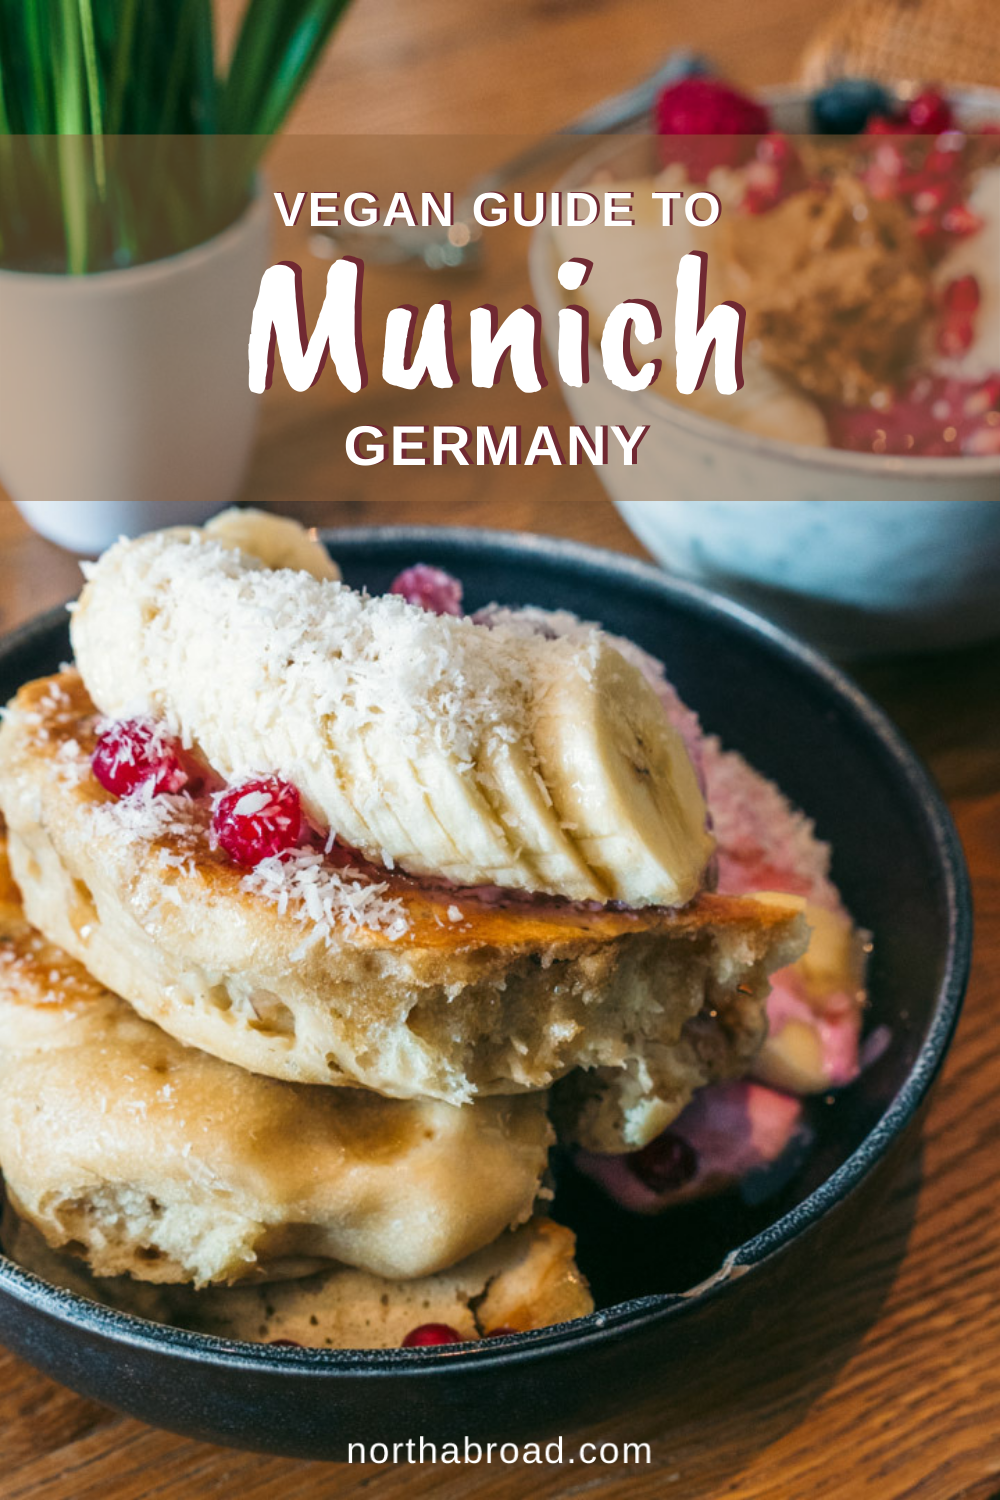 Vegan Eating Guide to Munich in Germany: The Best Restaurants & Cafés